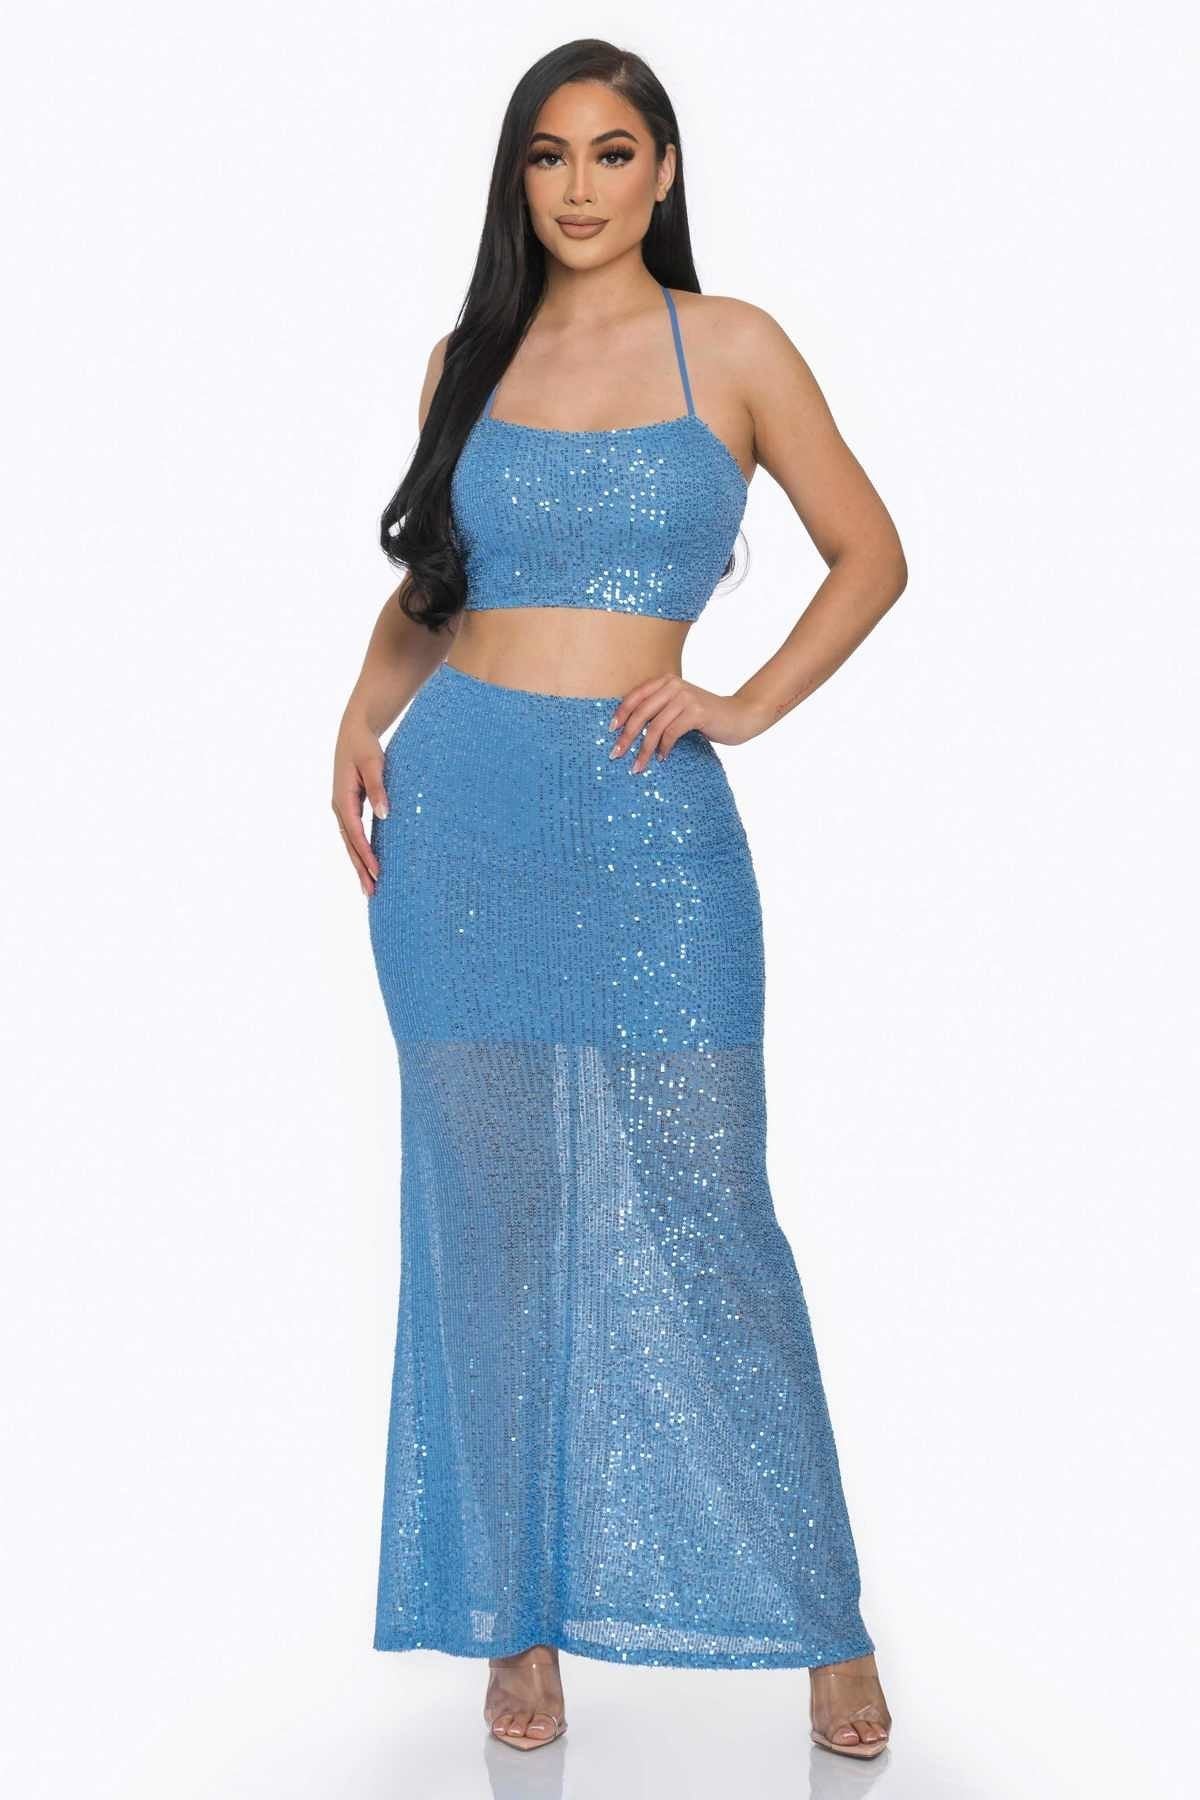 Sxy Back Sequin Maxi Dress - Love It Clothing